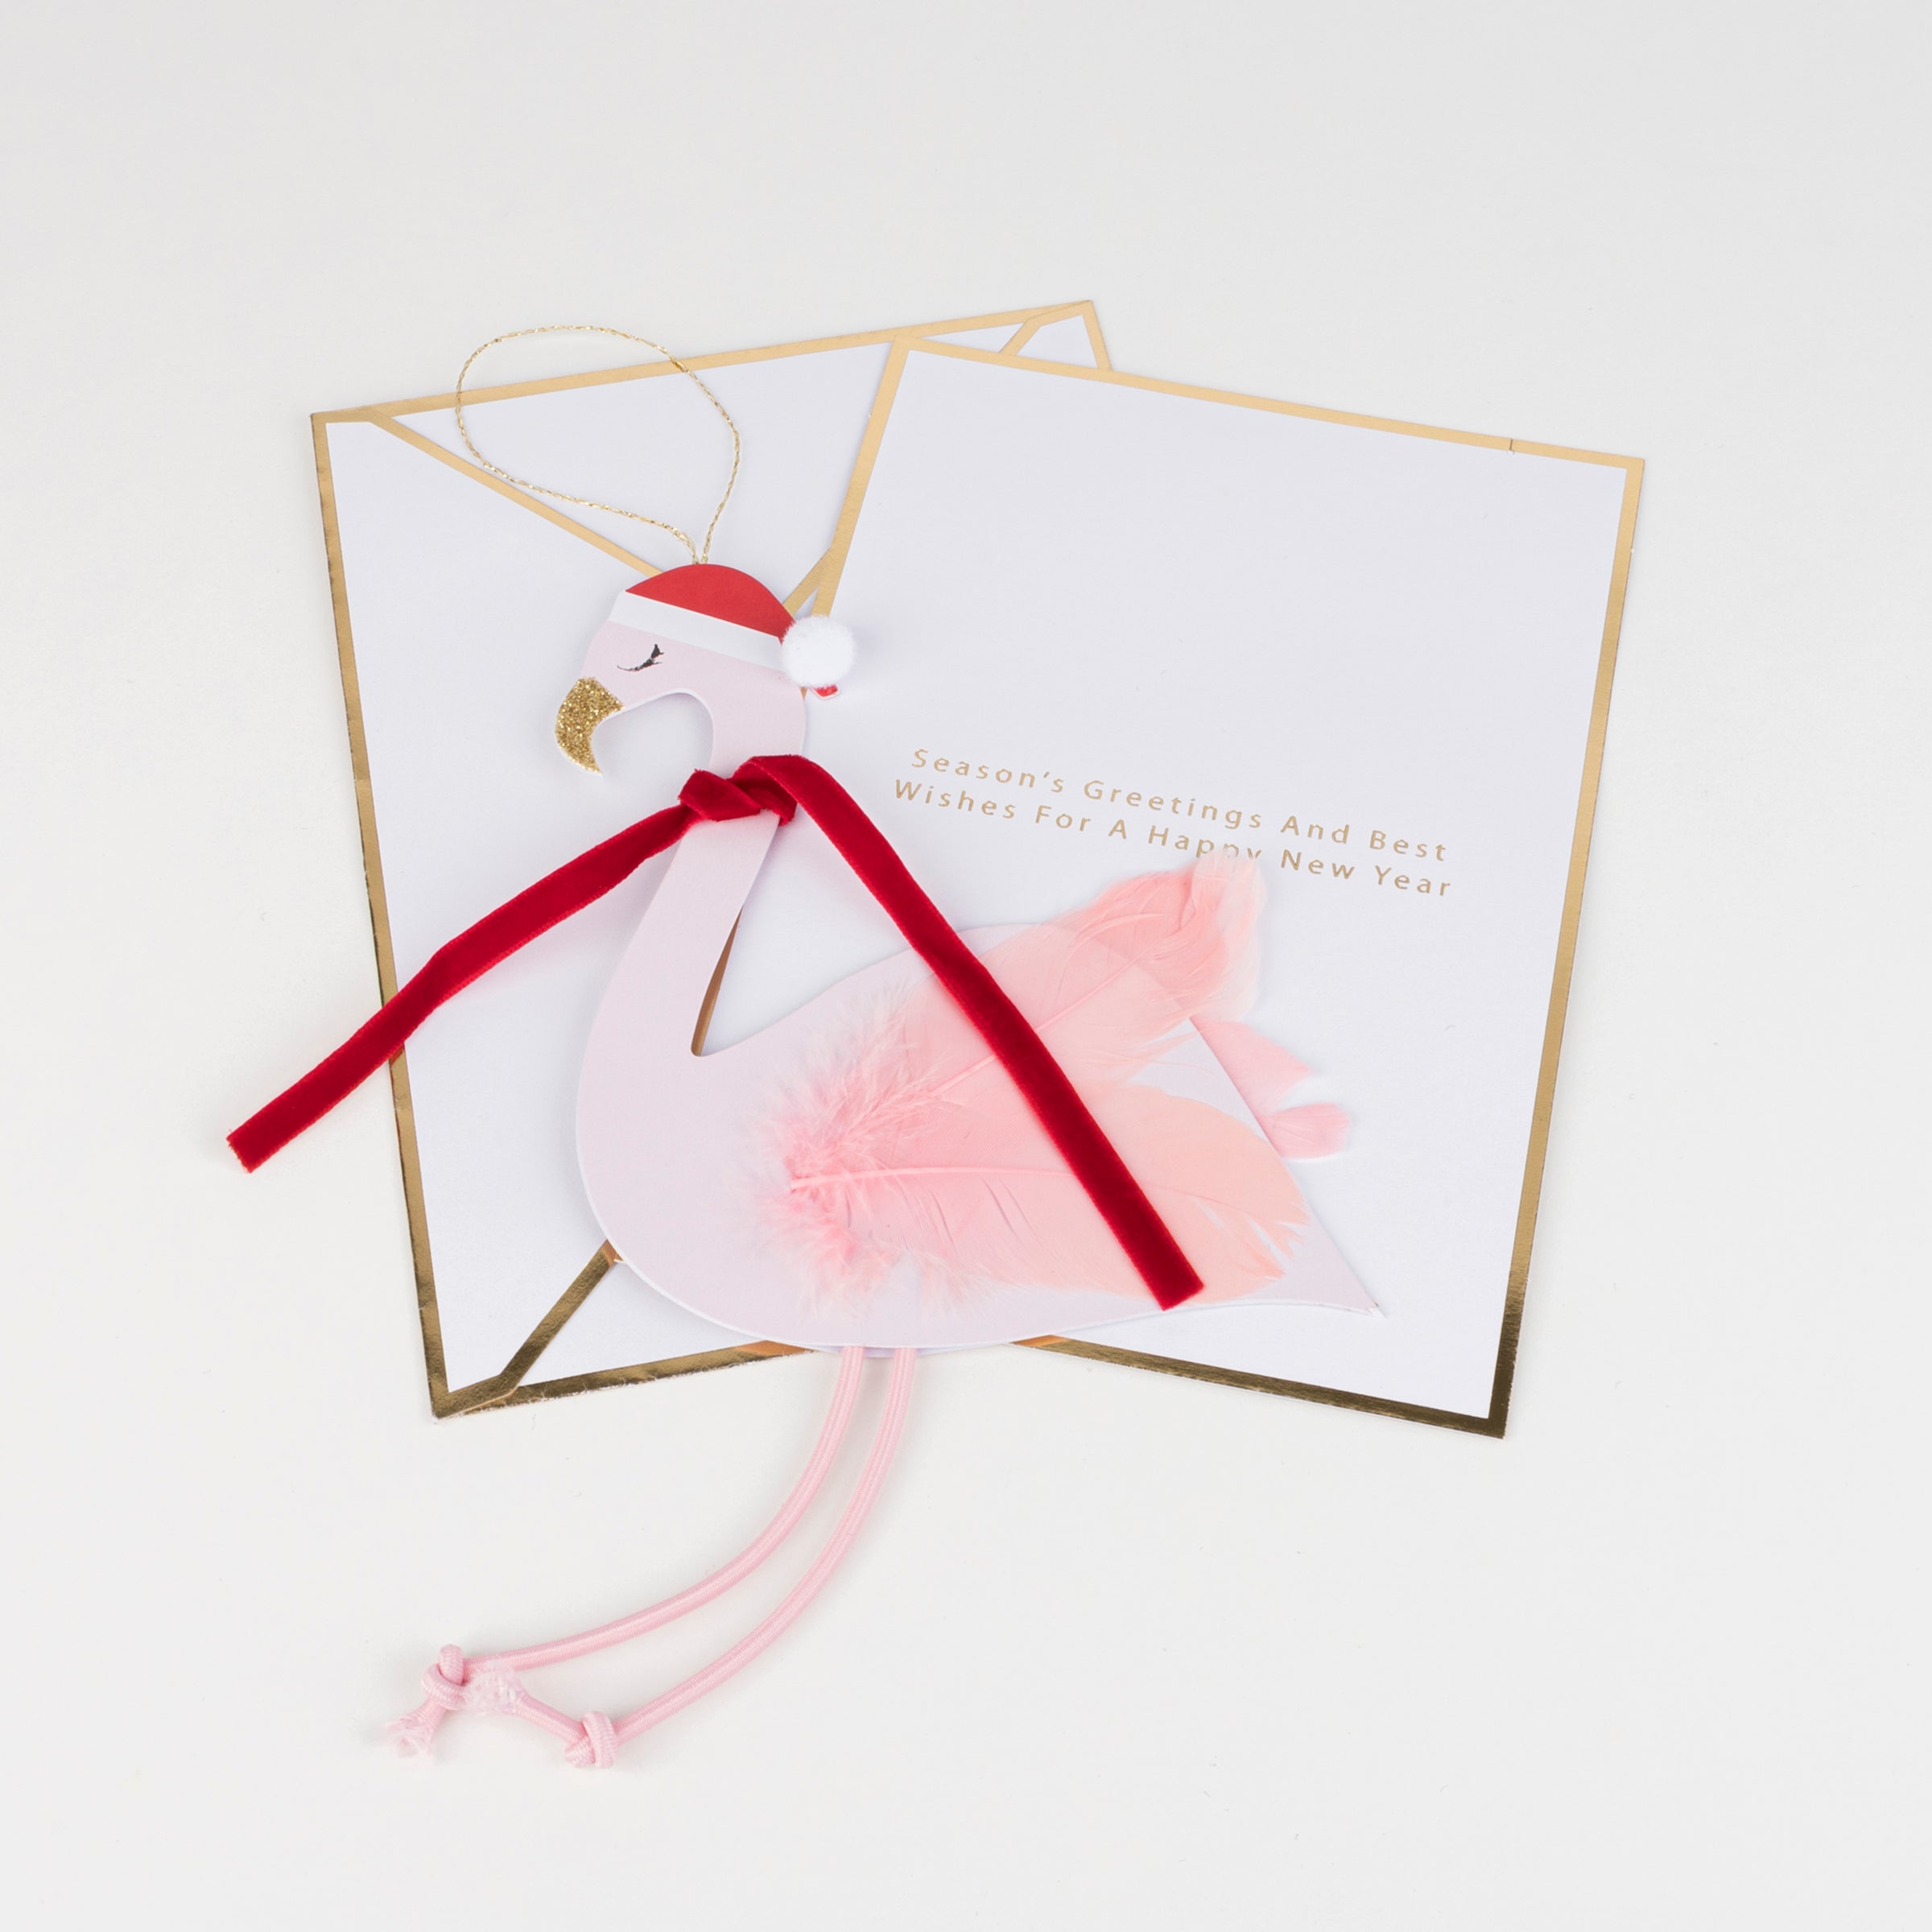 This wonderful card doubles up as a flamingo Christmas decoration, with a pompom, velvet ribbon, pink feathers and pink cord details.